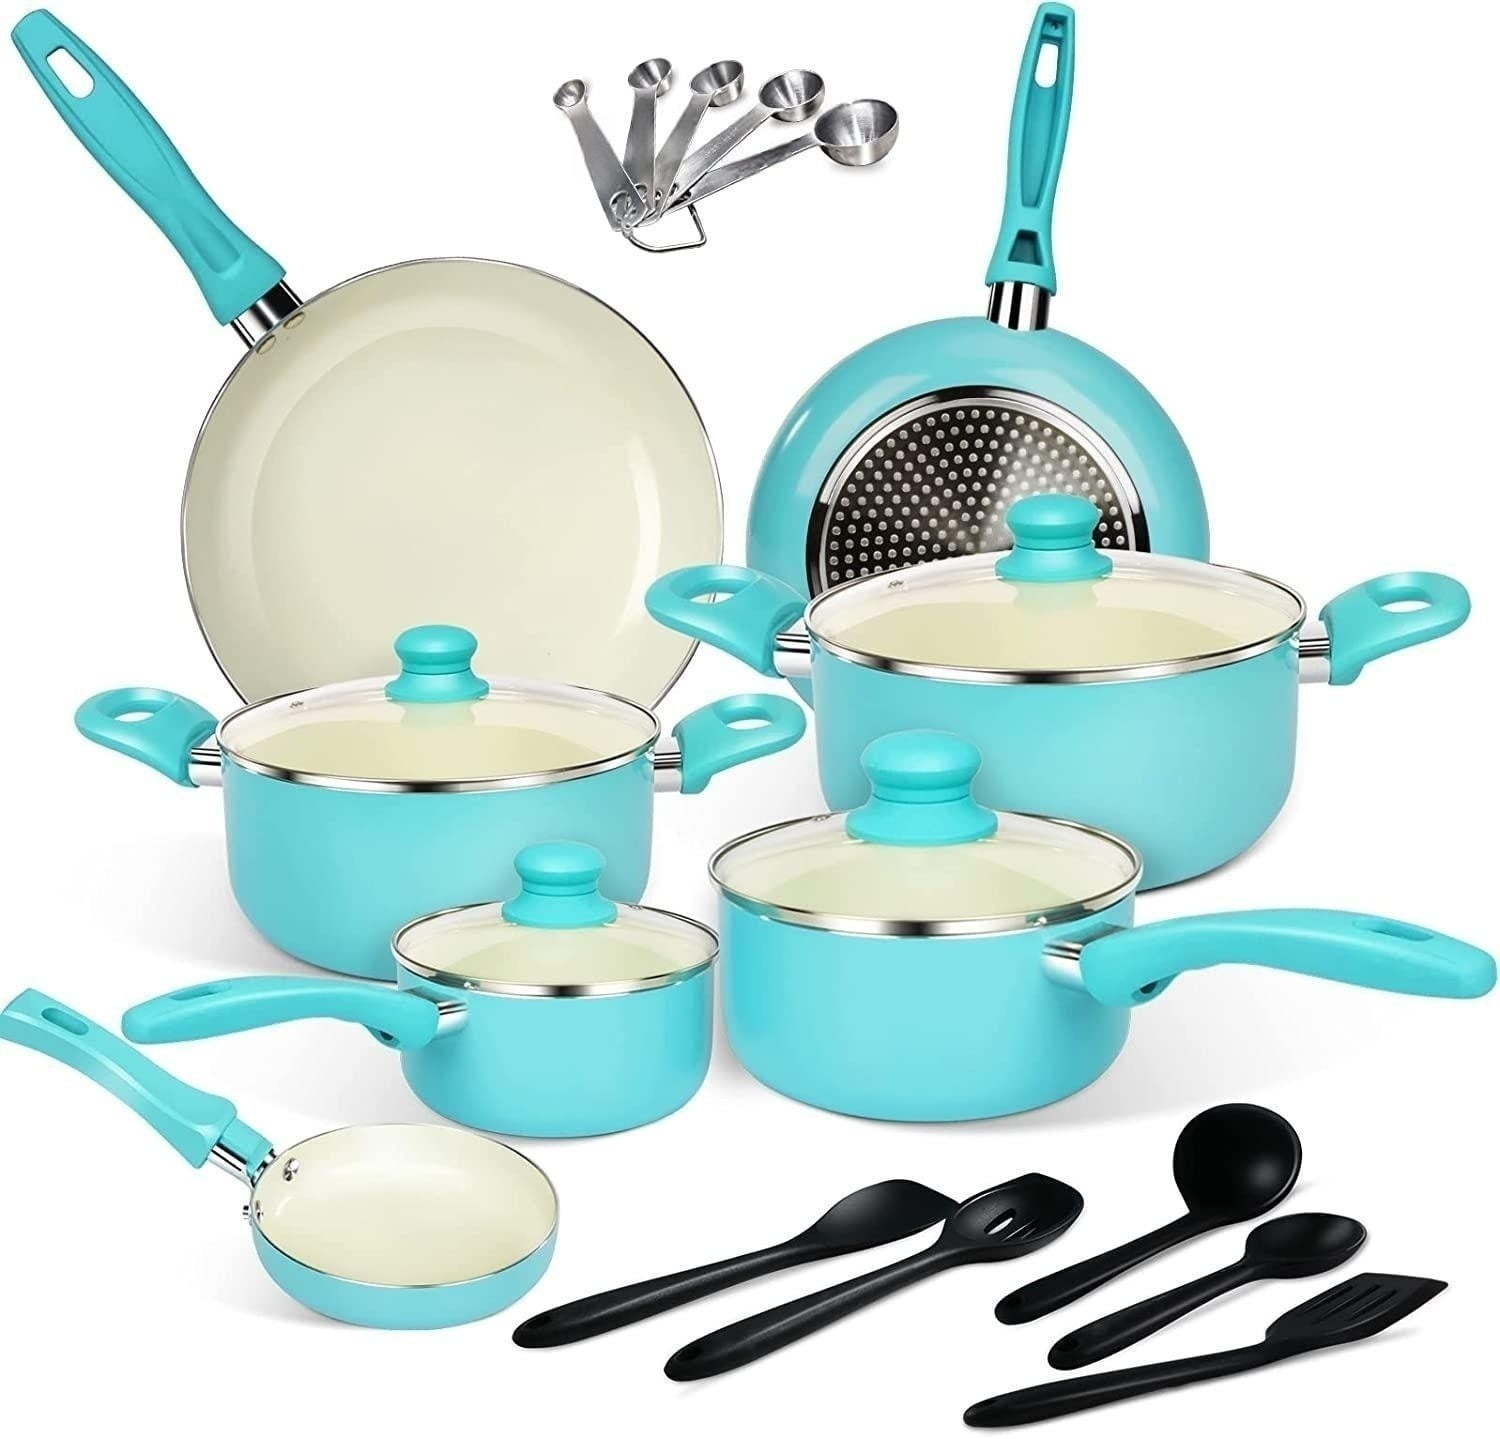 Multipurpose Cookware Set | Full-Size and Mini Always Pan and Perfect Pot Set in Blue Salt | 36 Pieces of Cookware in 4 | Toxin-Free Ceramic Coating 